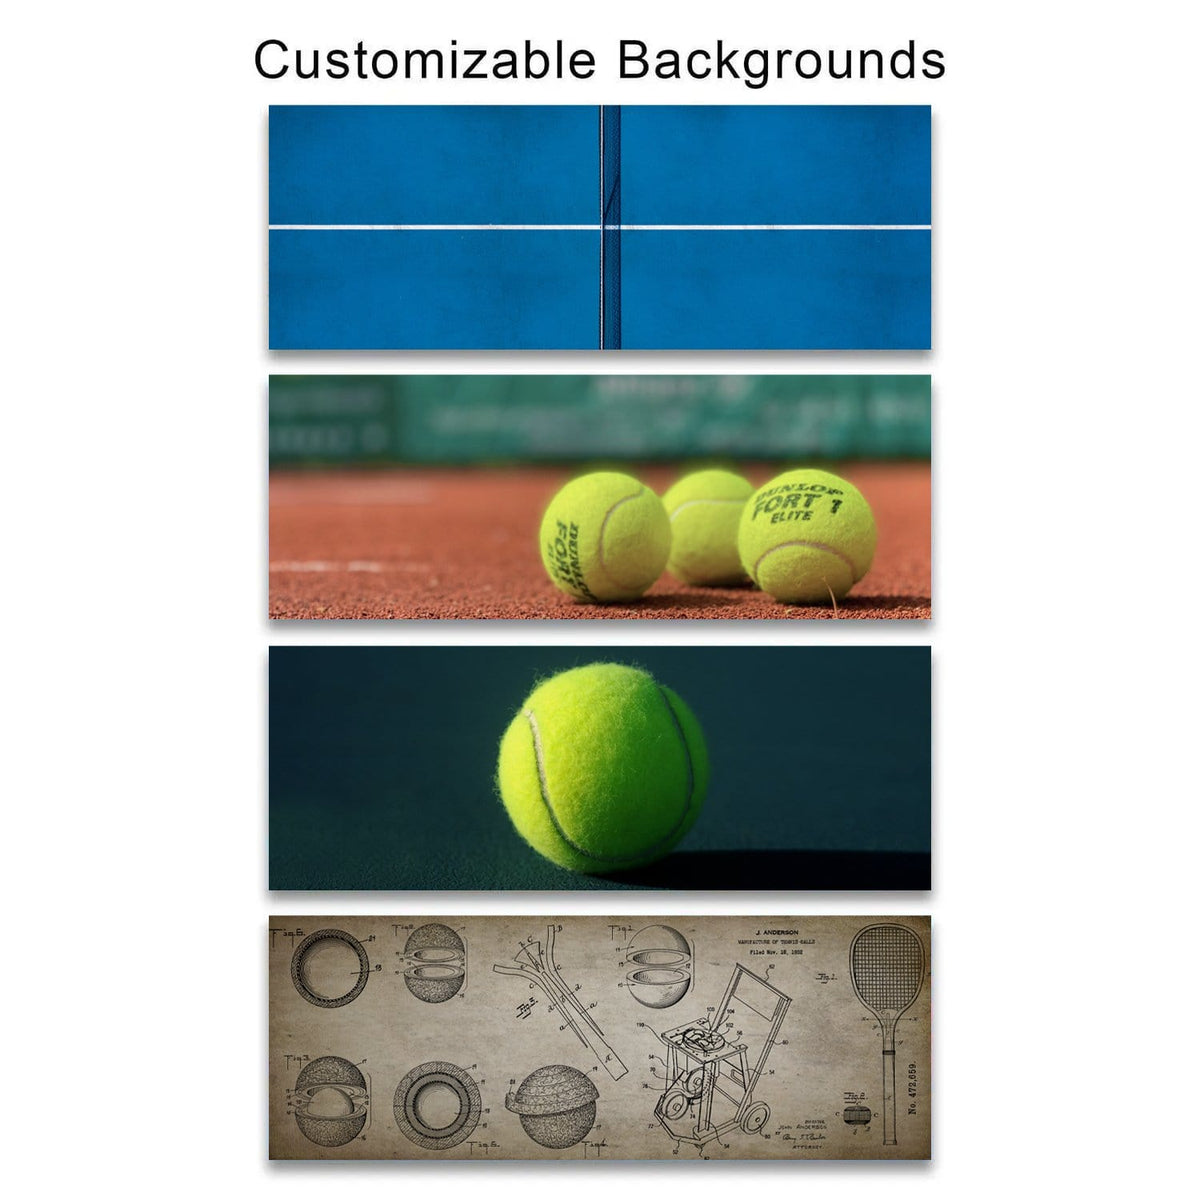 Customize your print with the background of your choice